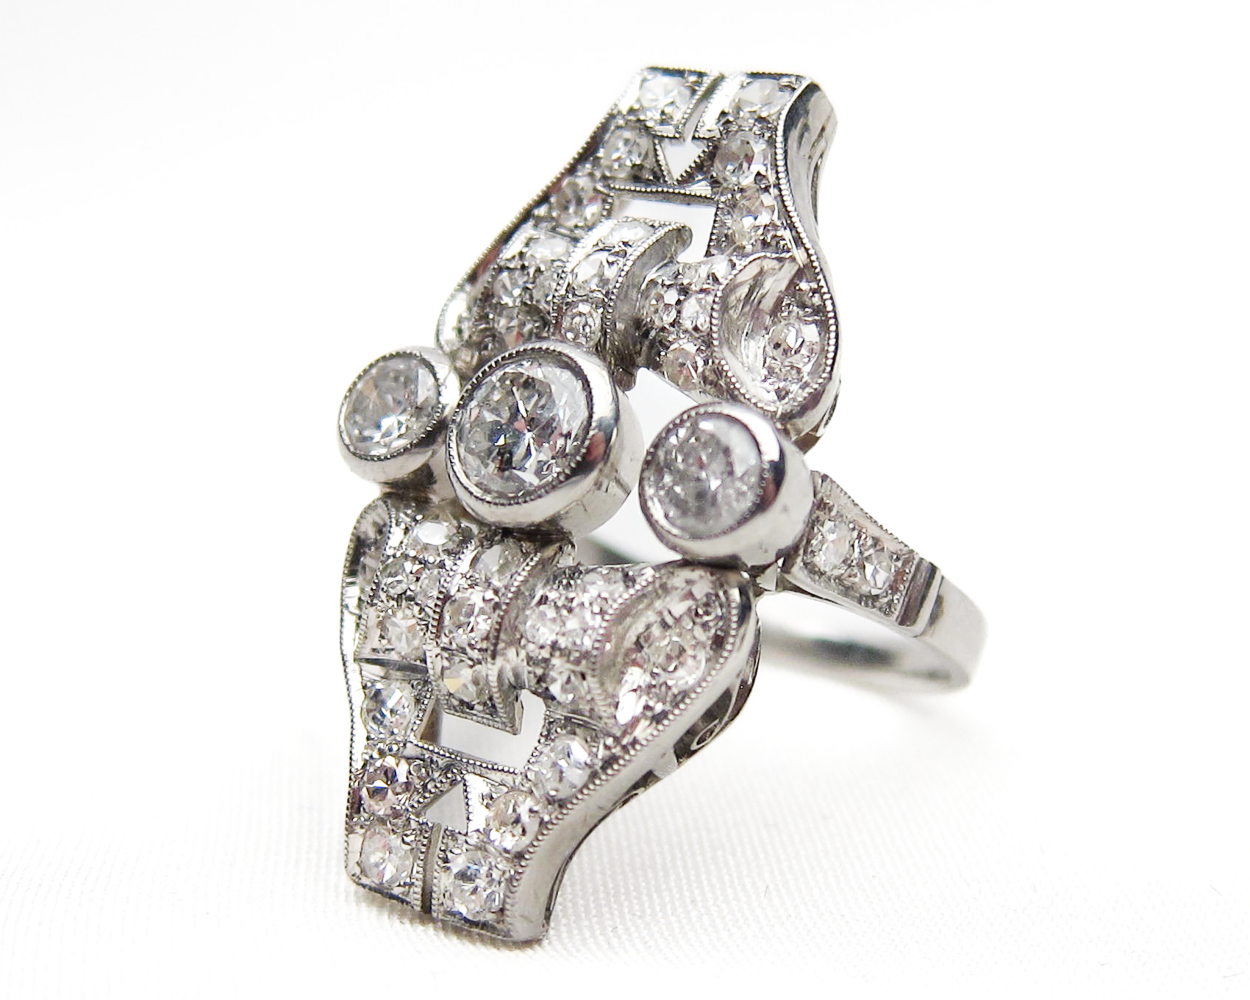 Edwardian Scroll-Styled Diamond North-South Ring